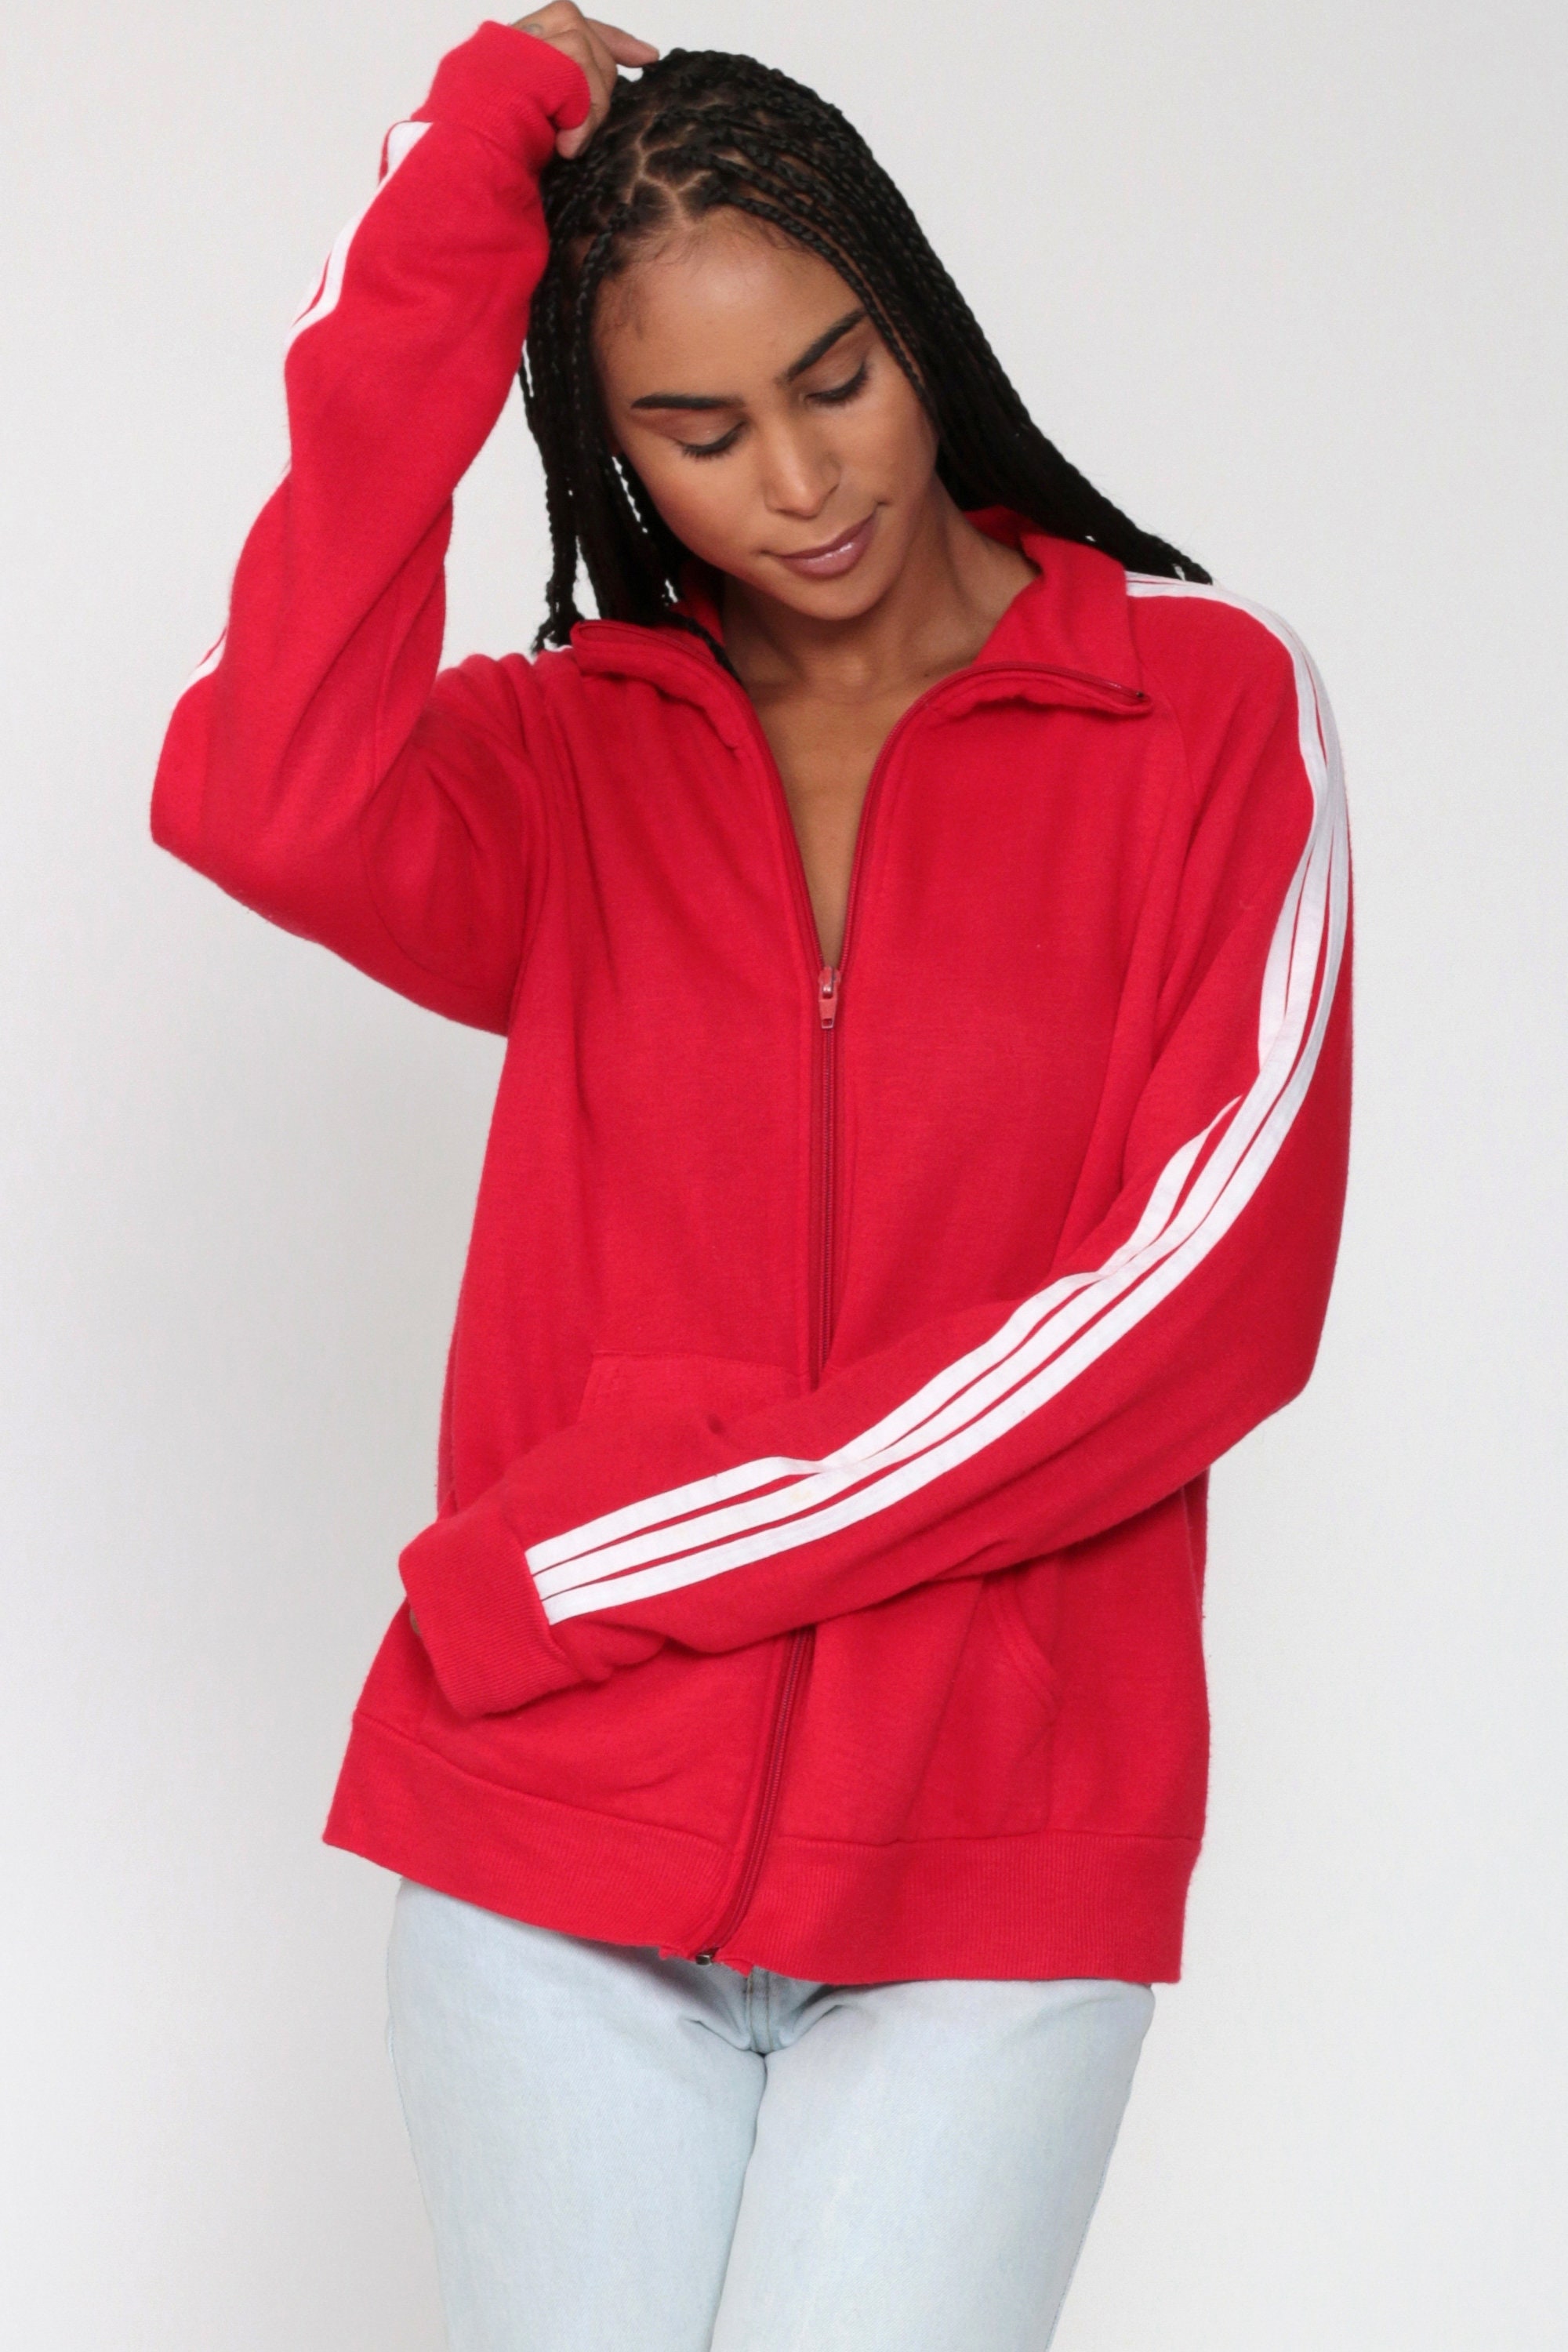 Red Track Jacket Zip Up Sweatshirt 80s Striped Collared Jacket Hipster ...